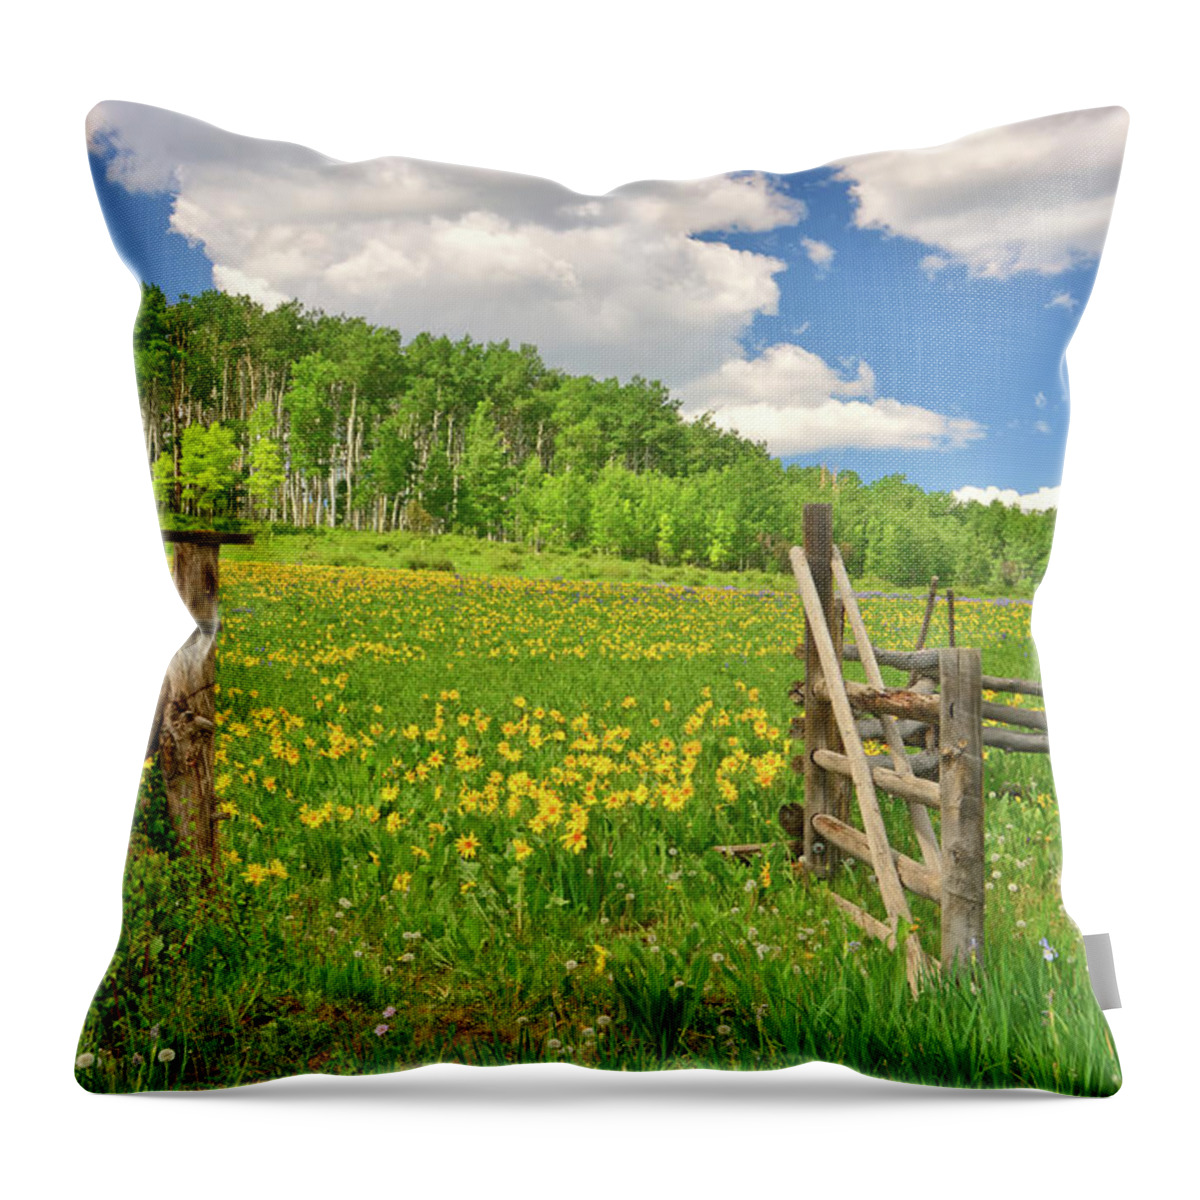 Tranquility Throw Pillow featuring the photograph Welcome To Heaven On Earth by Amy Hudechek